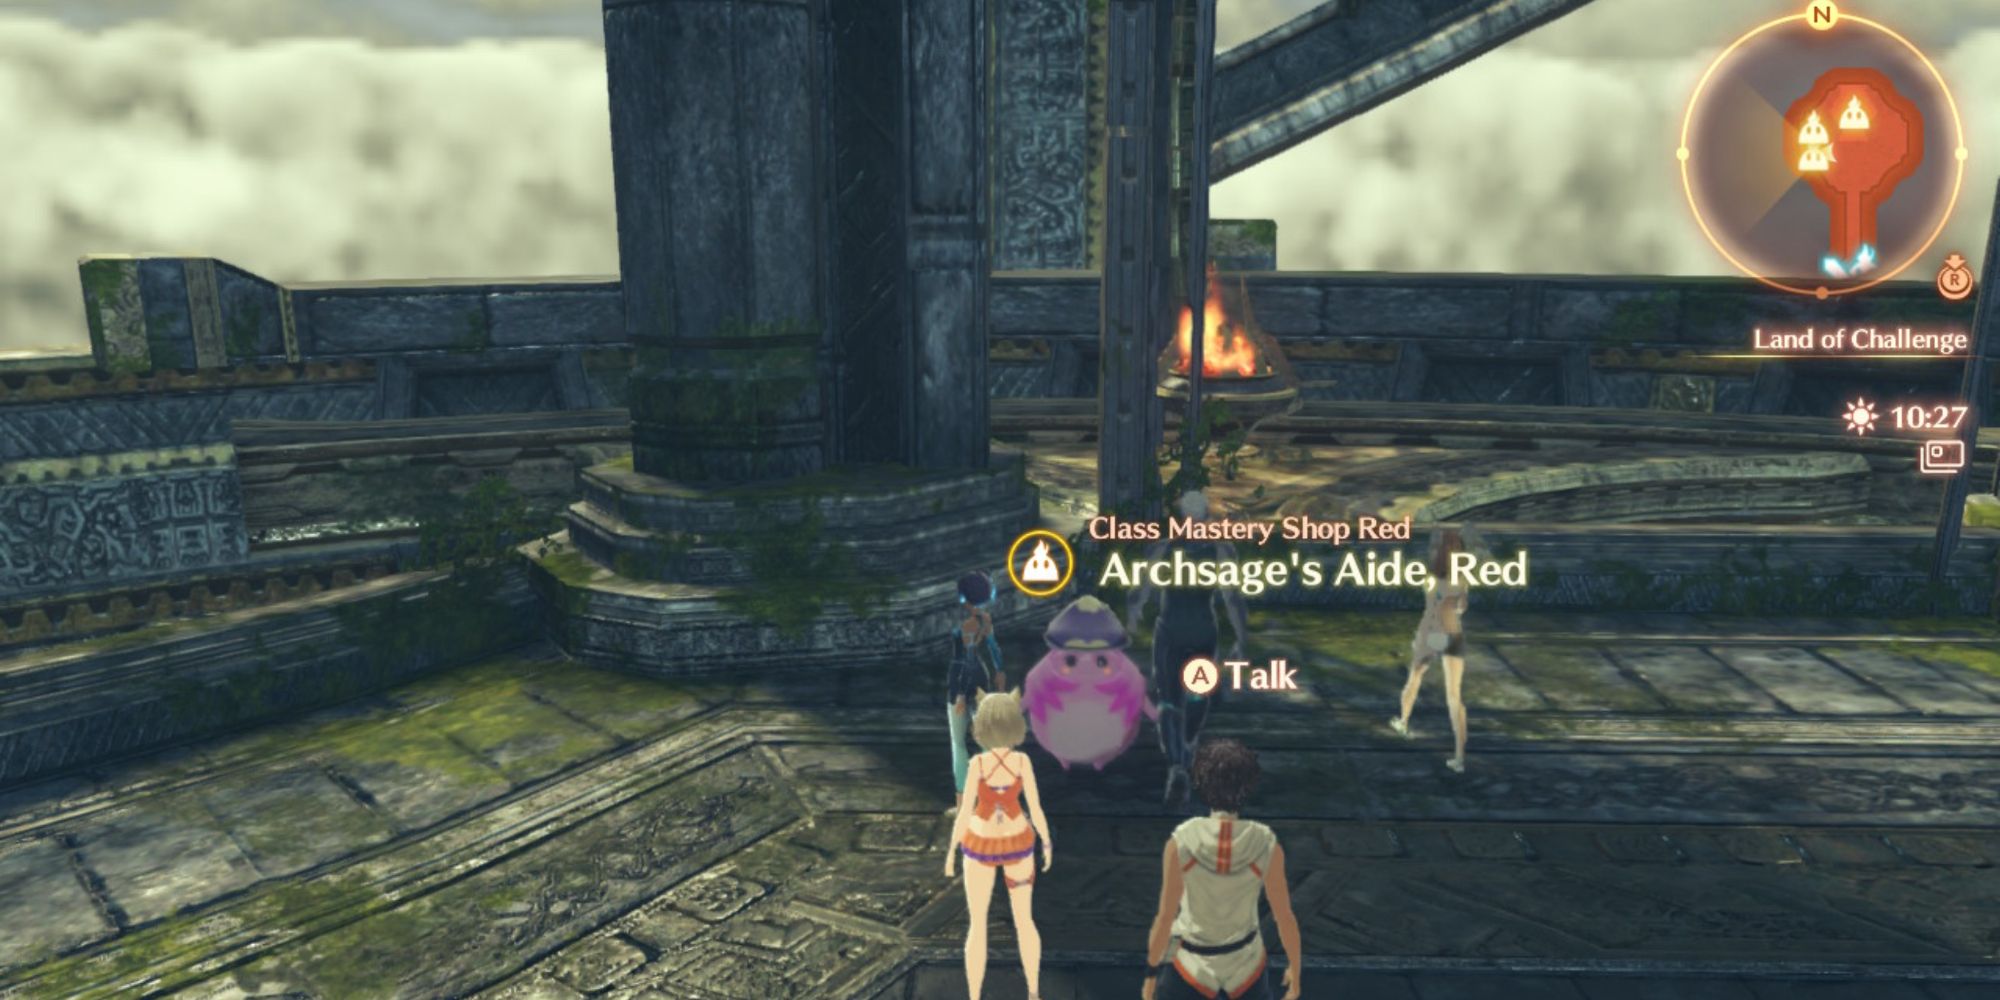 The Class Mastery Shop Red in Xenoblade Chronicles 3